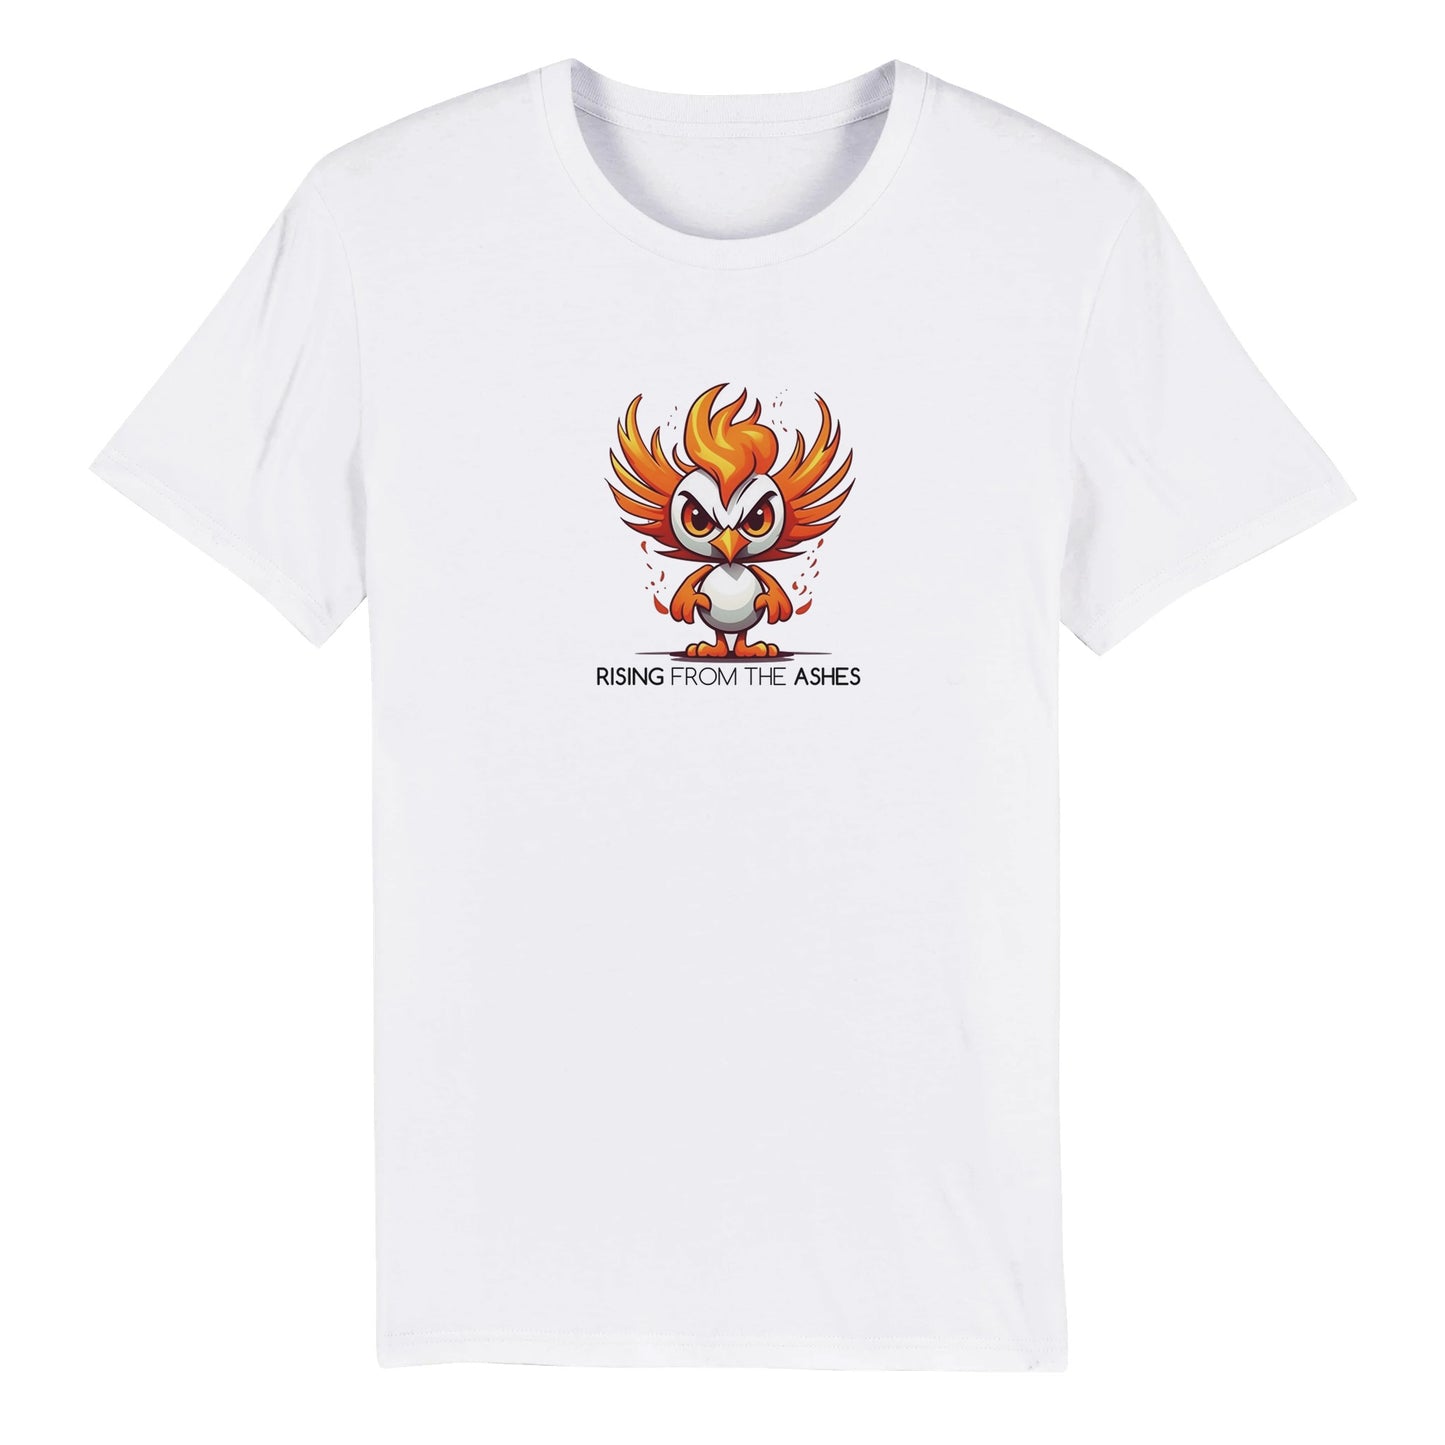 Rising from The Ashes Organic Unisex Tee Clothes by Tobey Alexander